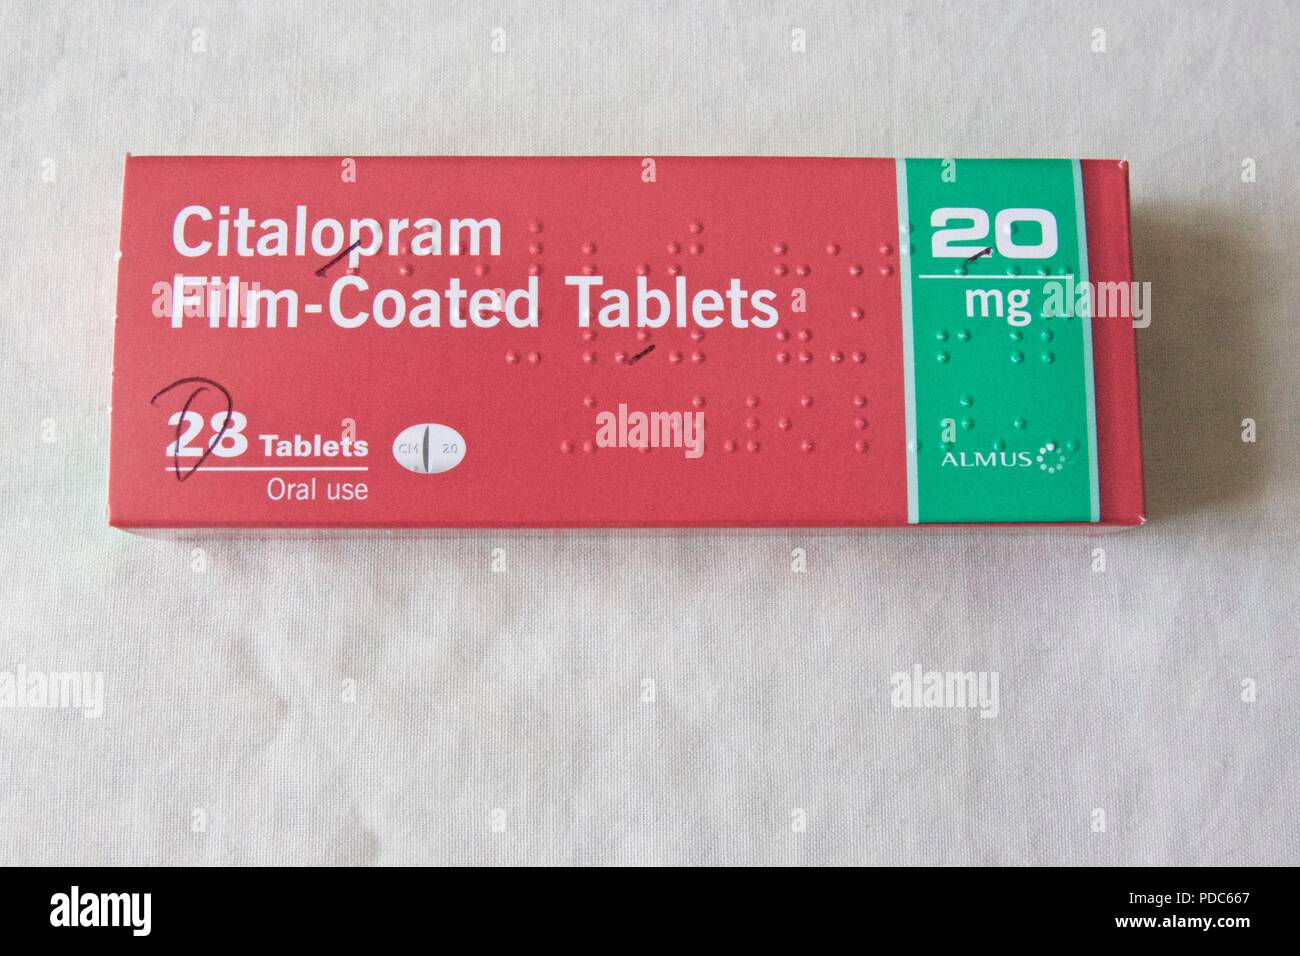 Citalopram is a type of antidepressant known as an SSRI (selective serotonin reuptake inhibitor) which is used to treat depression. Stock Photo